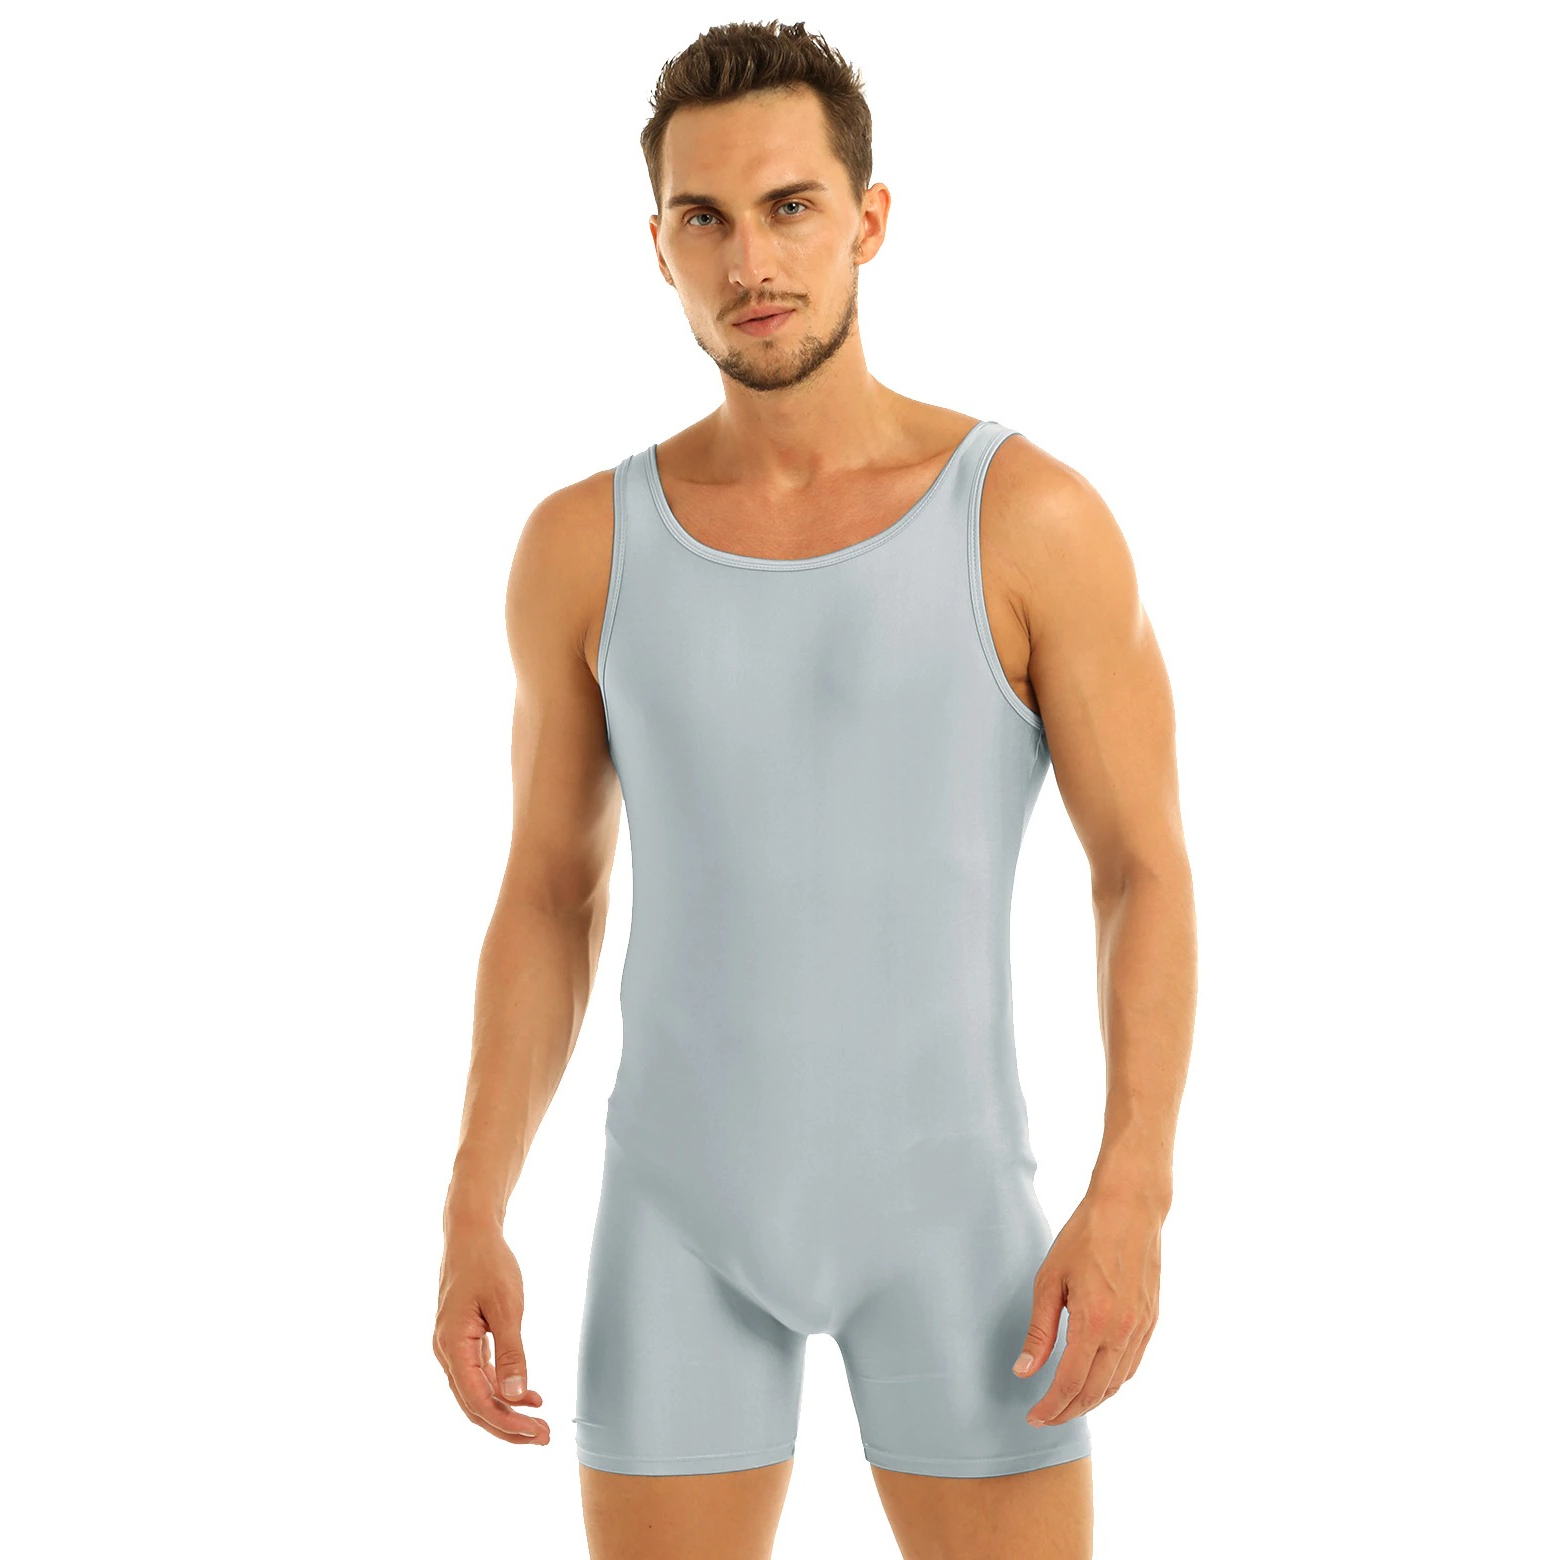 Solid Sleeveless Slim Fit Bodysuit with Round Neck / One-Piece Lingerie Bodysuit for Men - EVE's SECRETS